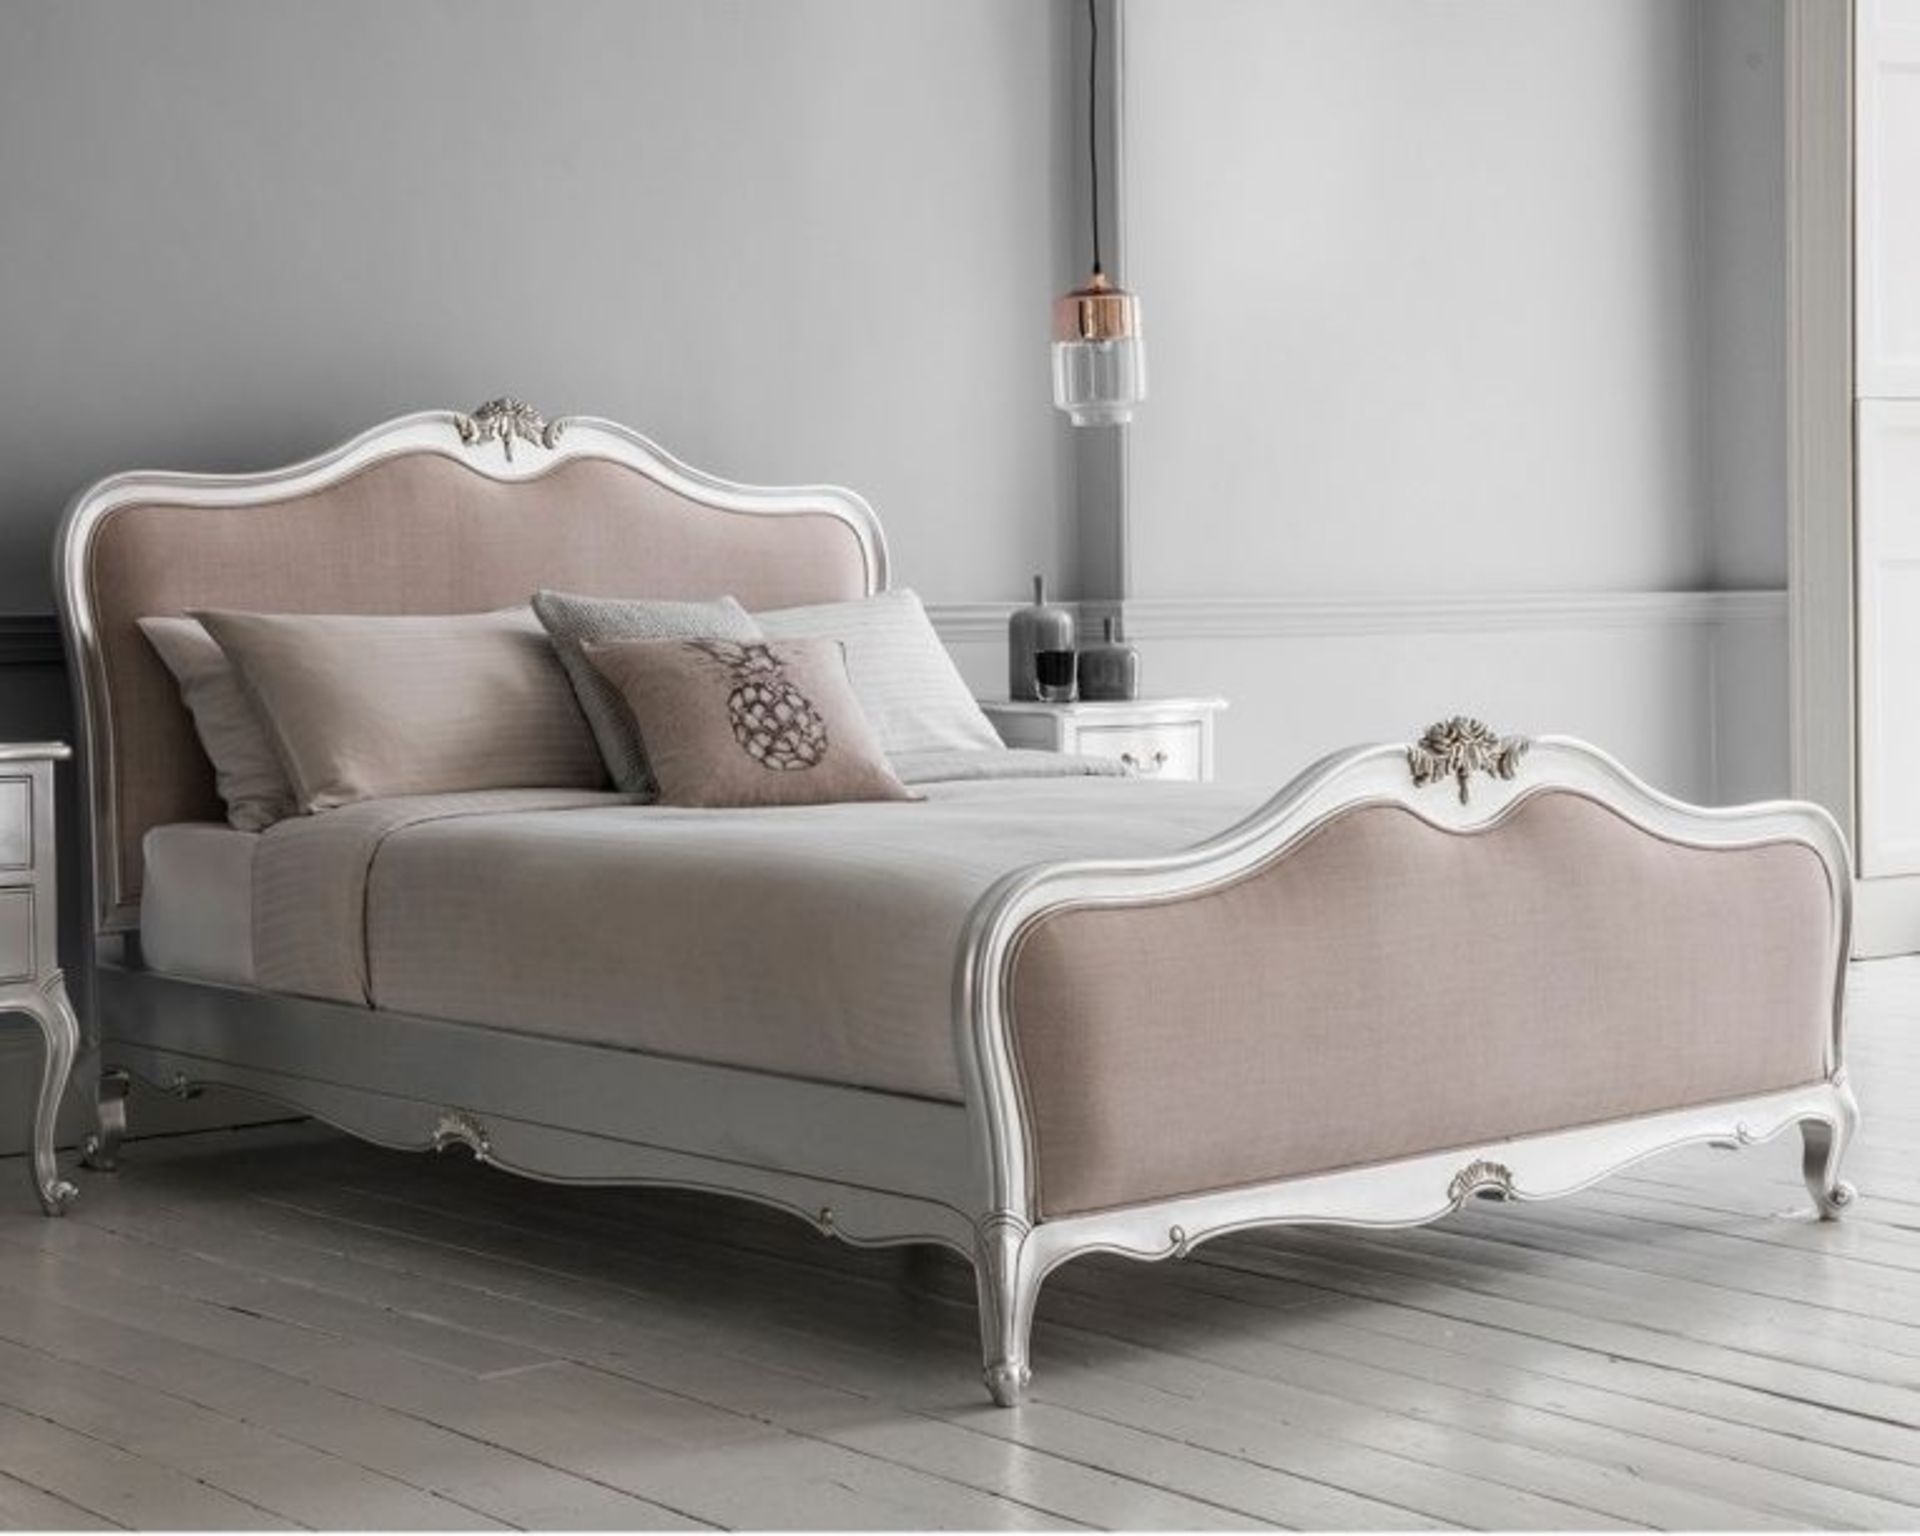 Hudson Chic 6' Superking Linen Upholstered Bed Frame Silver Handcrafted With Exquisite Attention